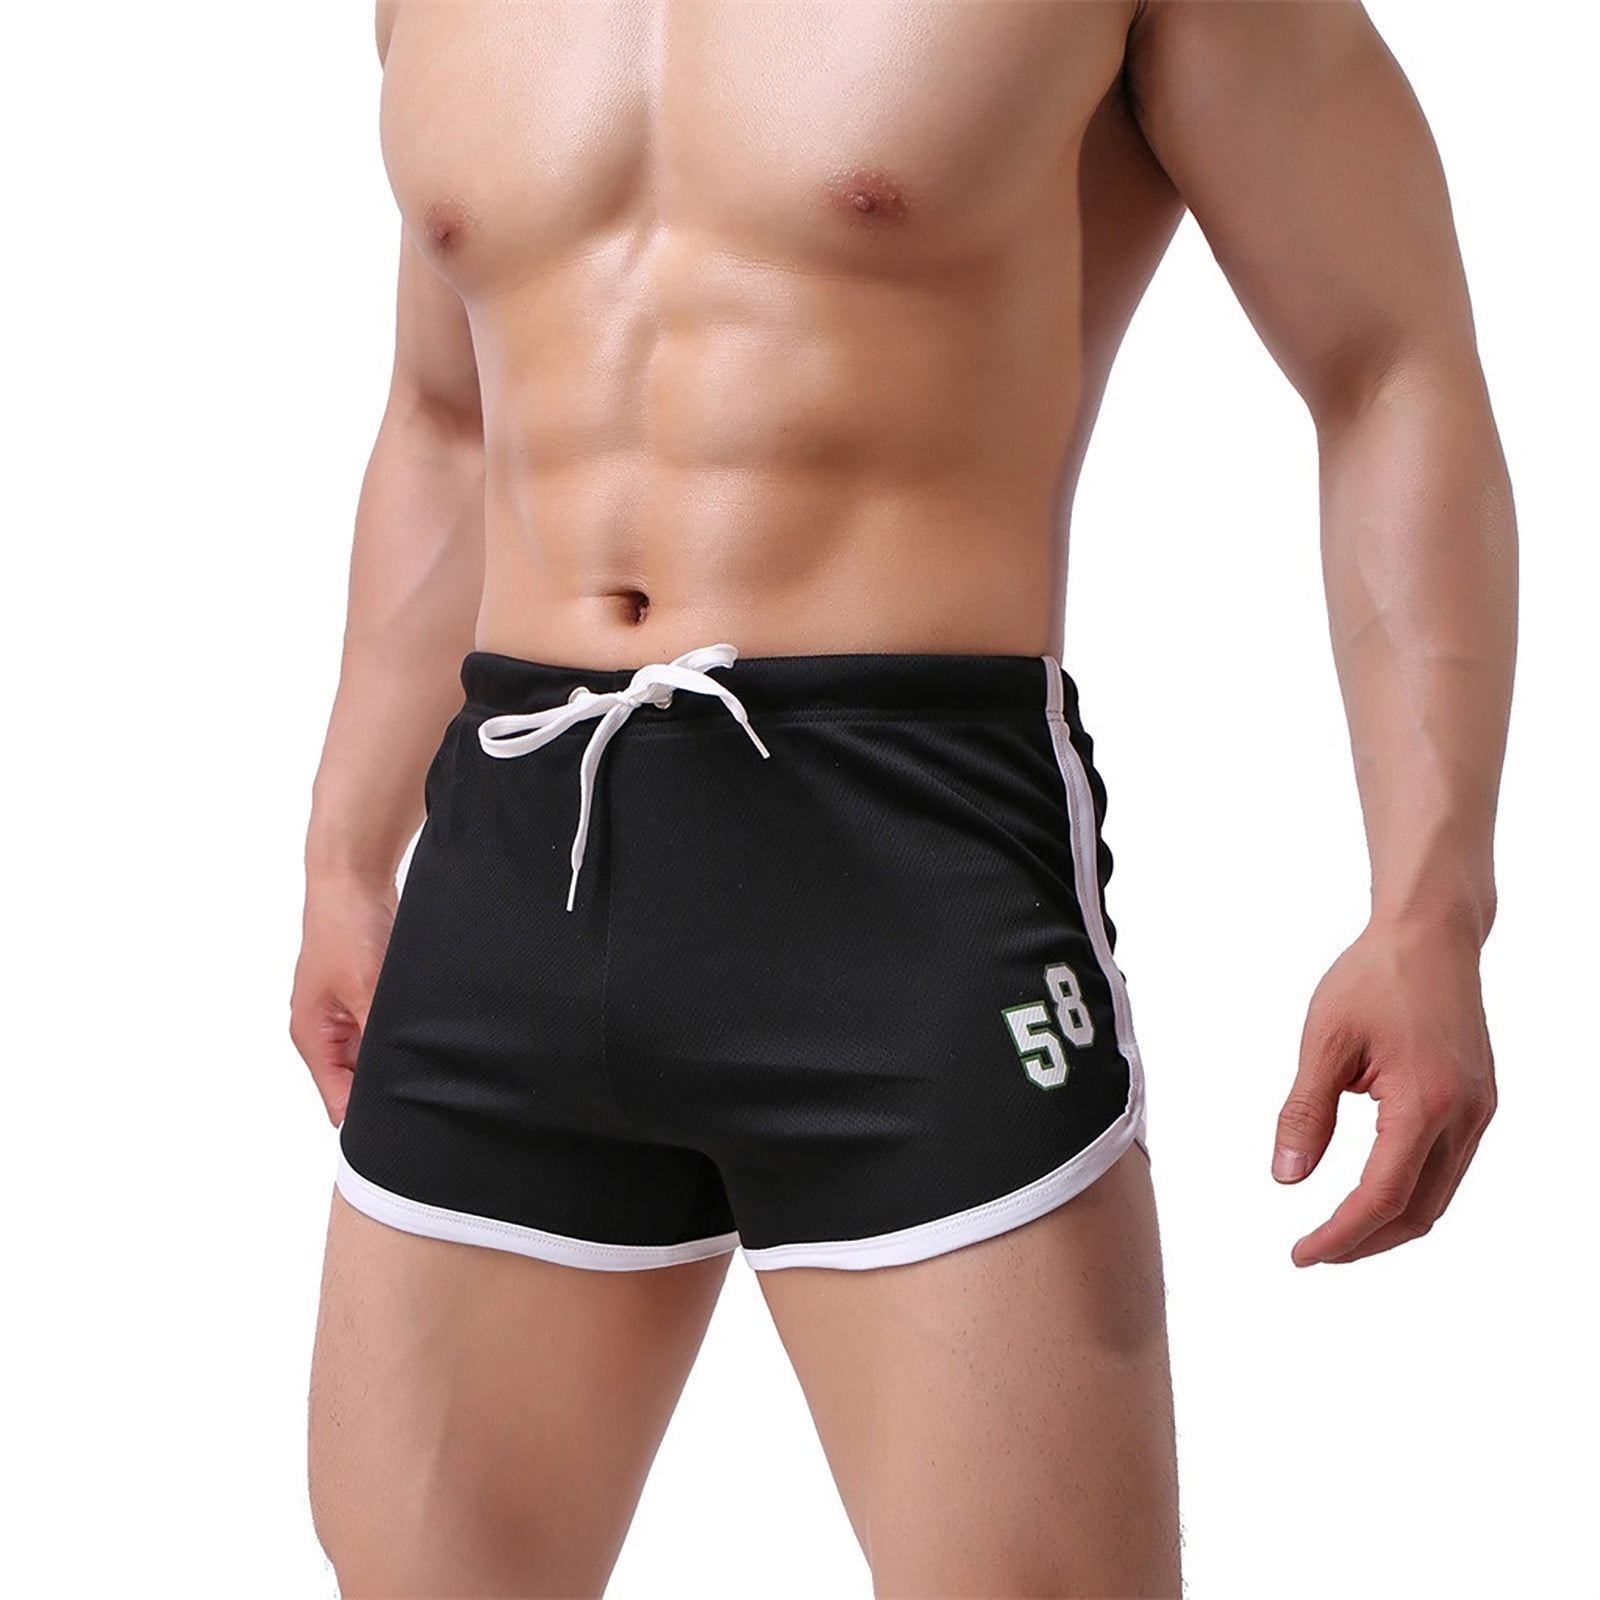 Running Shorts Gym Men Quick Dry Training Fitness Sport Breathable Jogging Short  Musculation Homme Sportswear Beach Wear From Vanilla12, $15.79